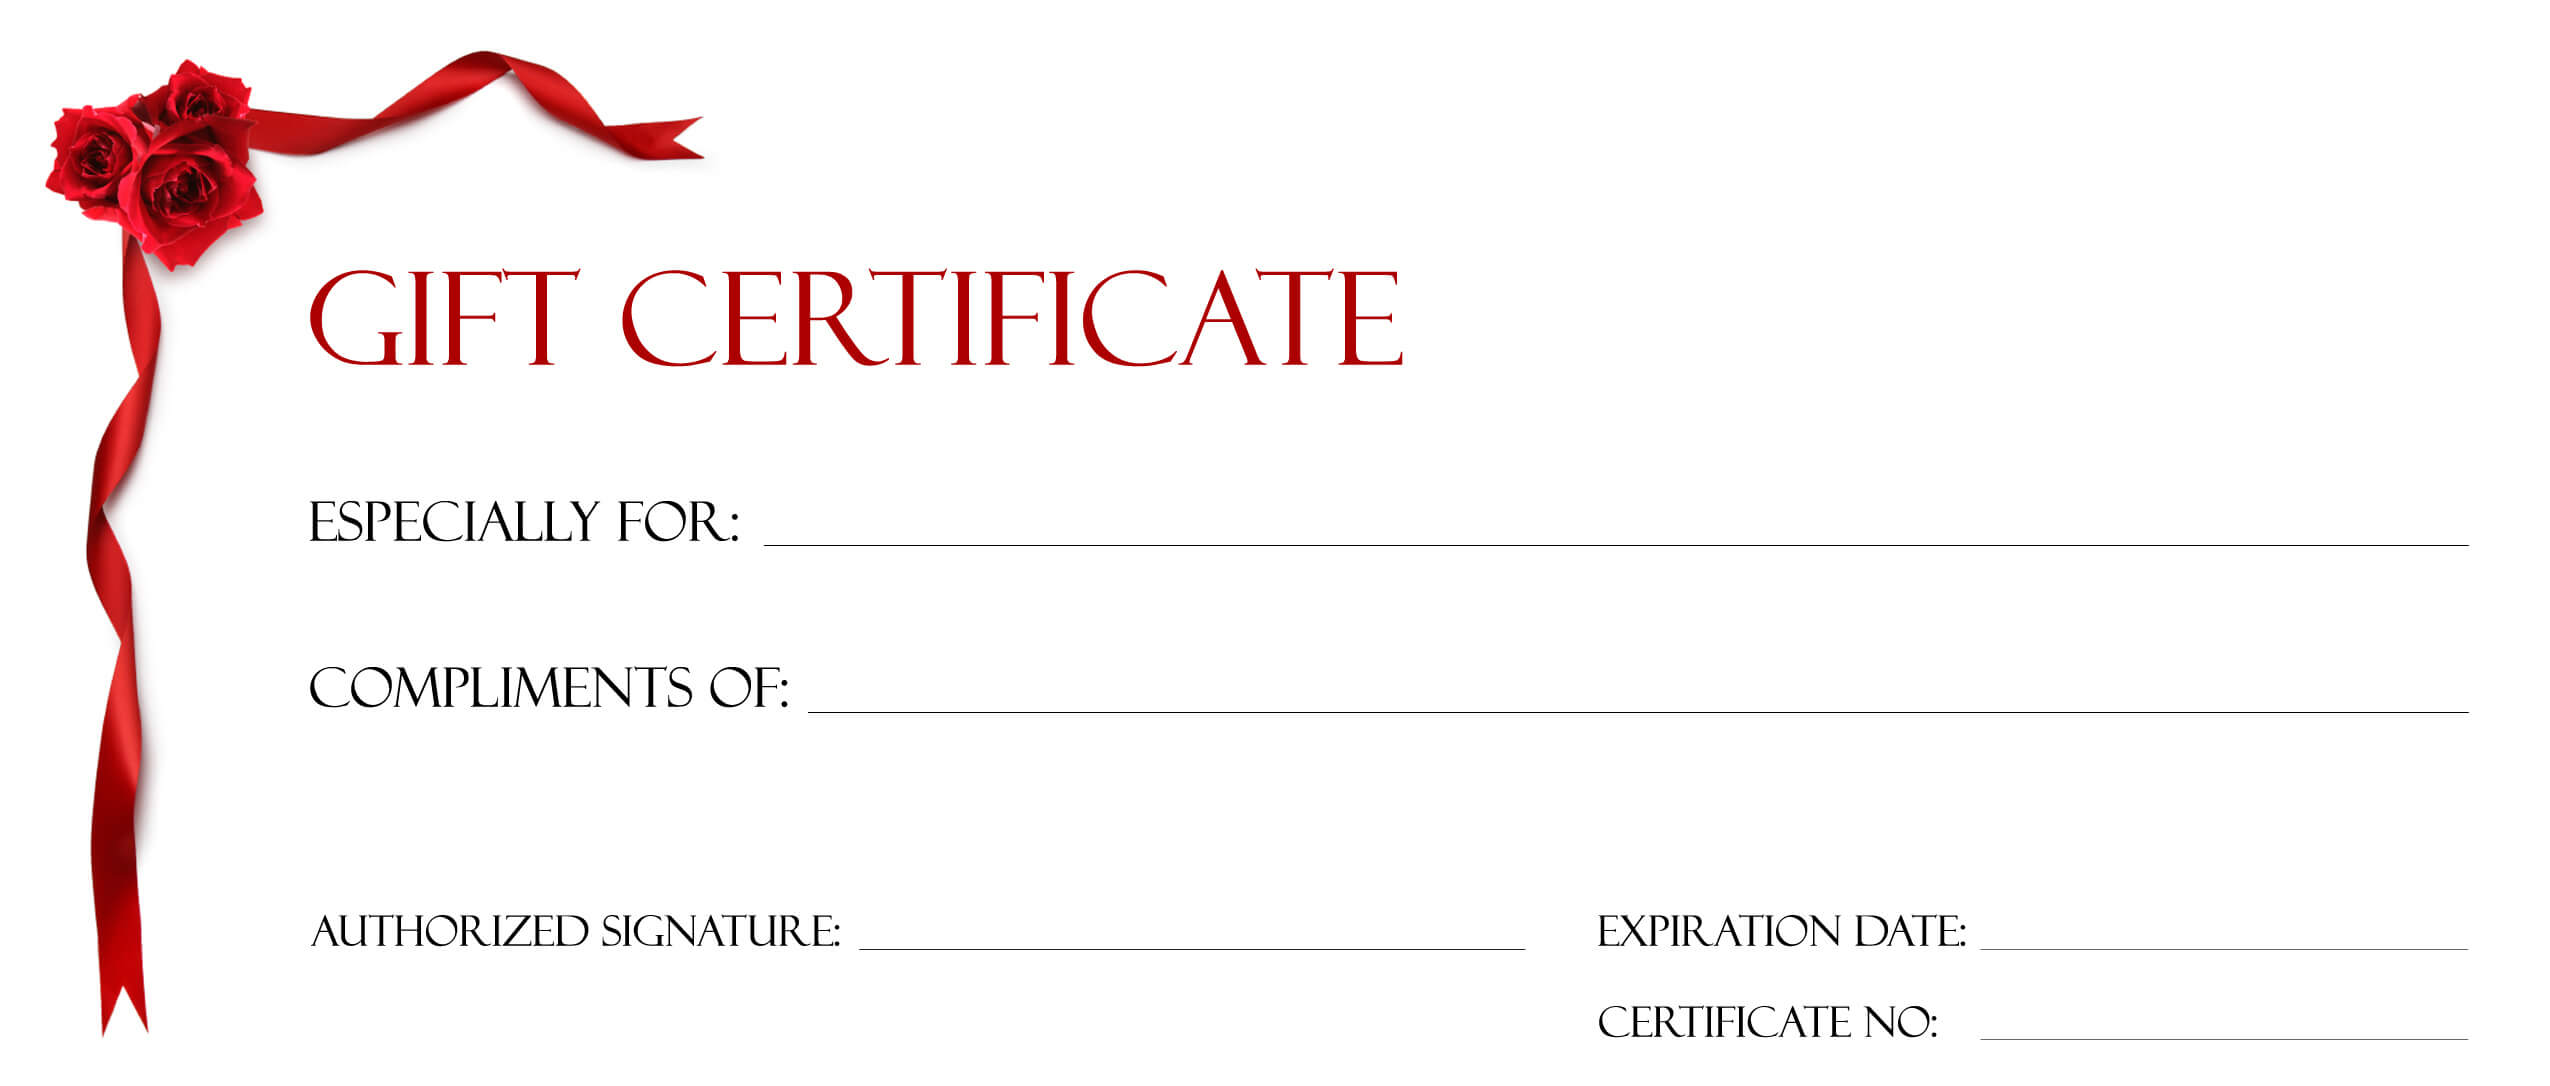 Gift Certificate Template Microsoft Publisher Throughout Gift Certificate Template Publisher